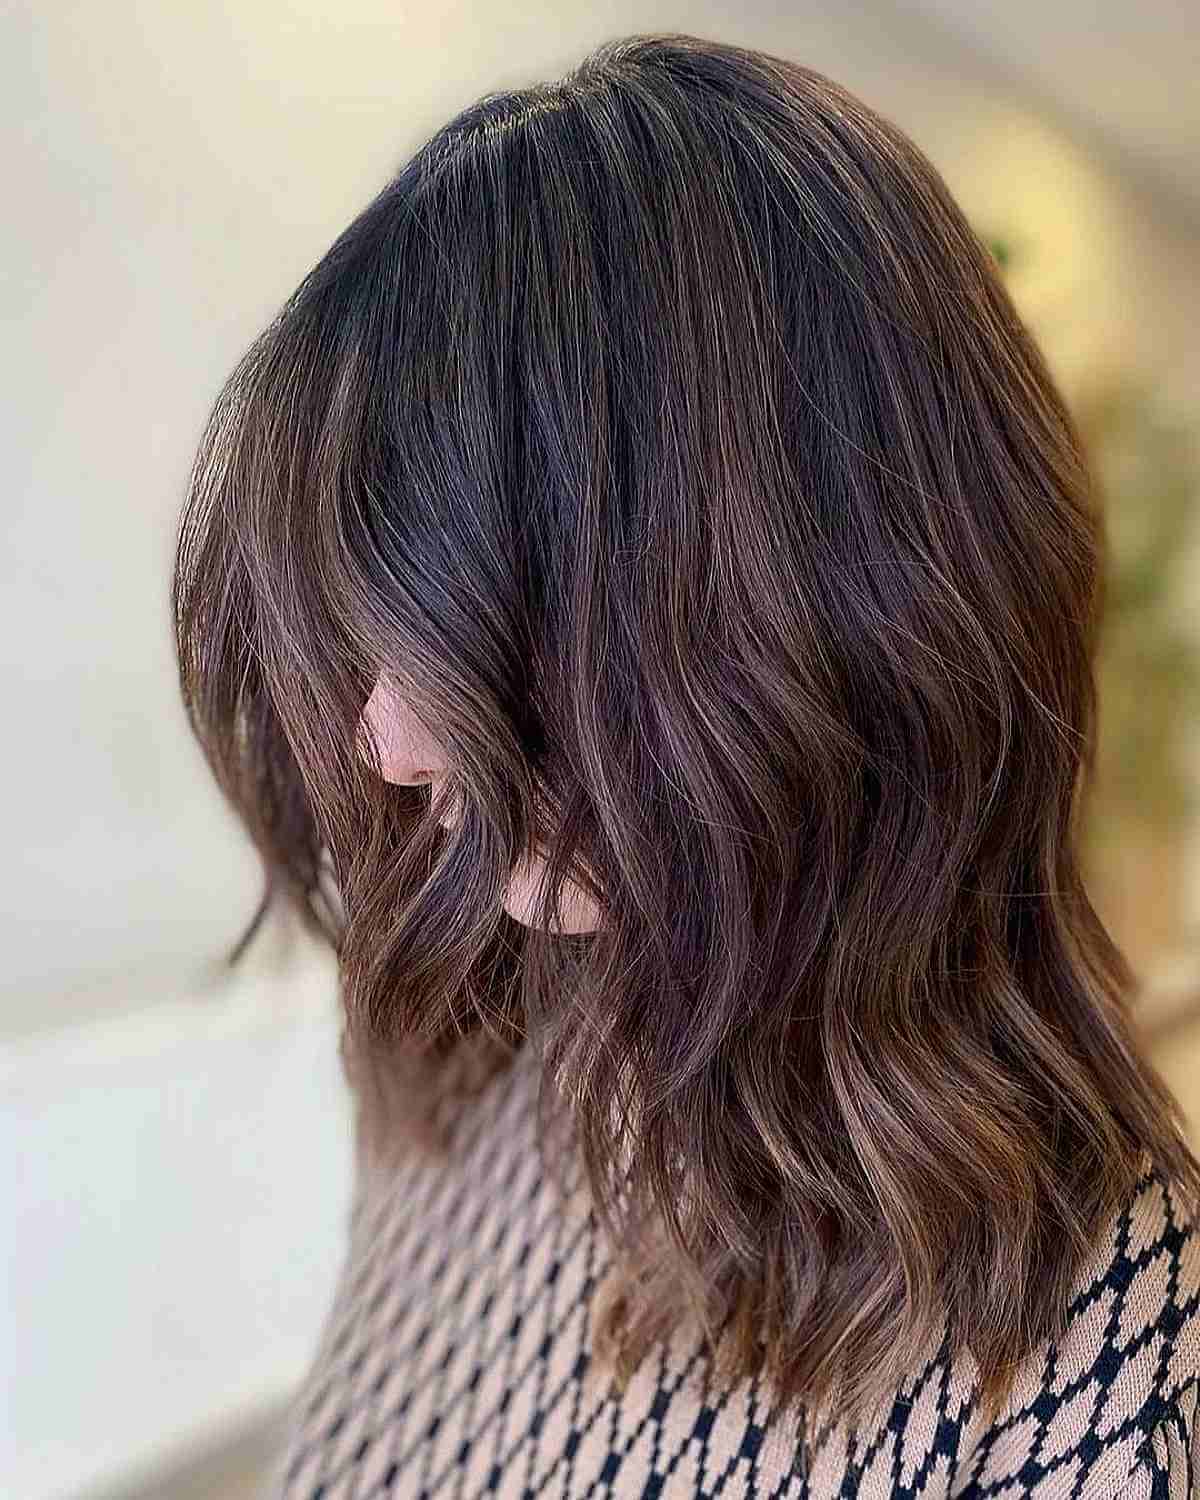 Medium Softly Layered Cut with Textured Ends